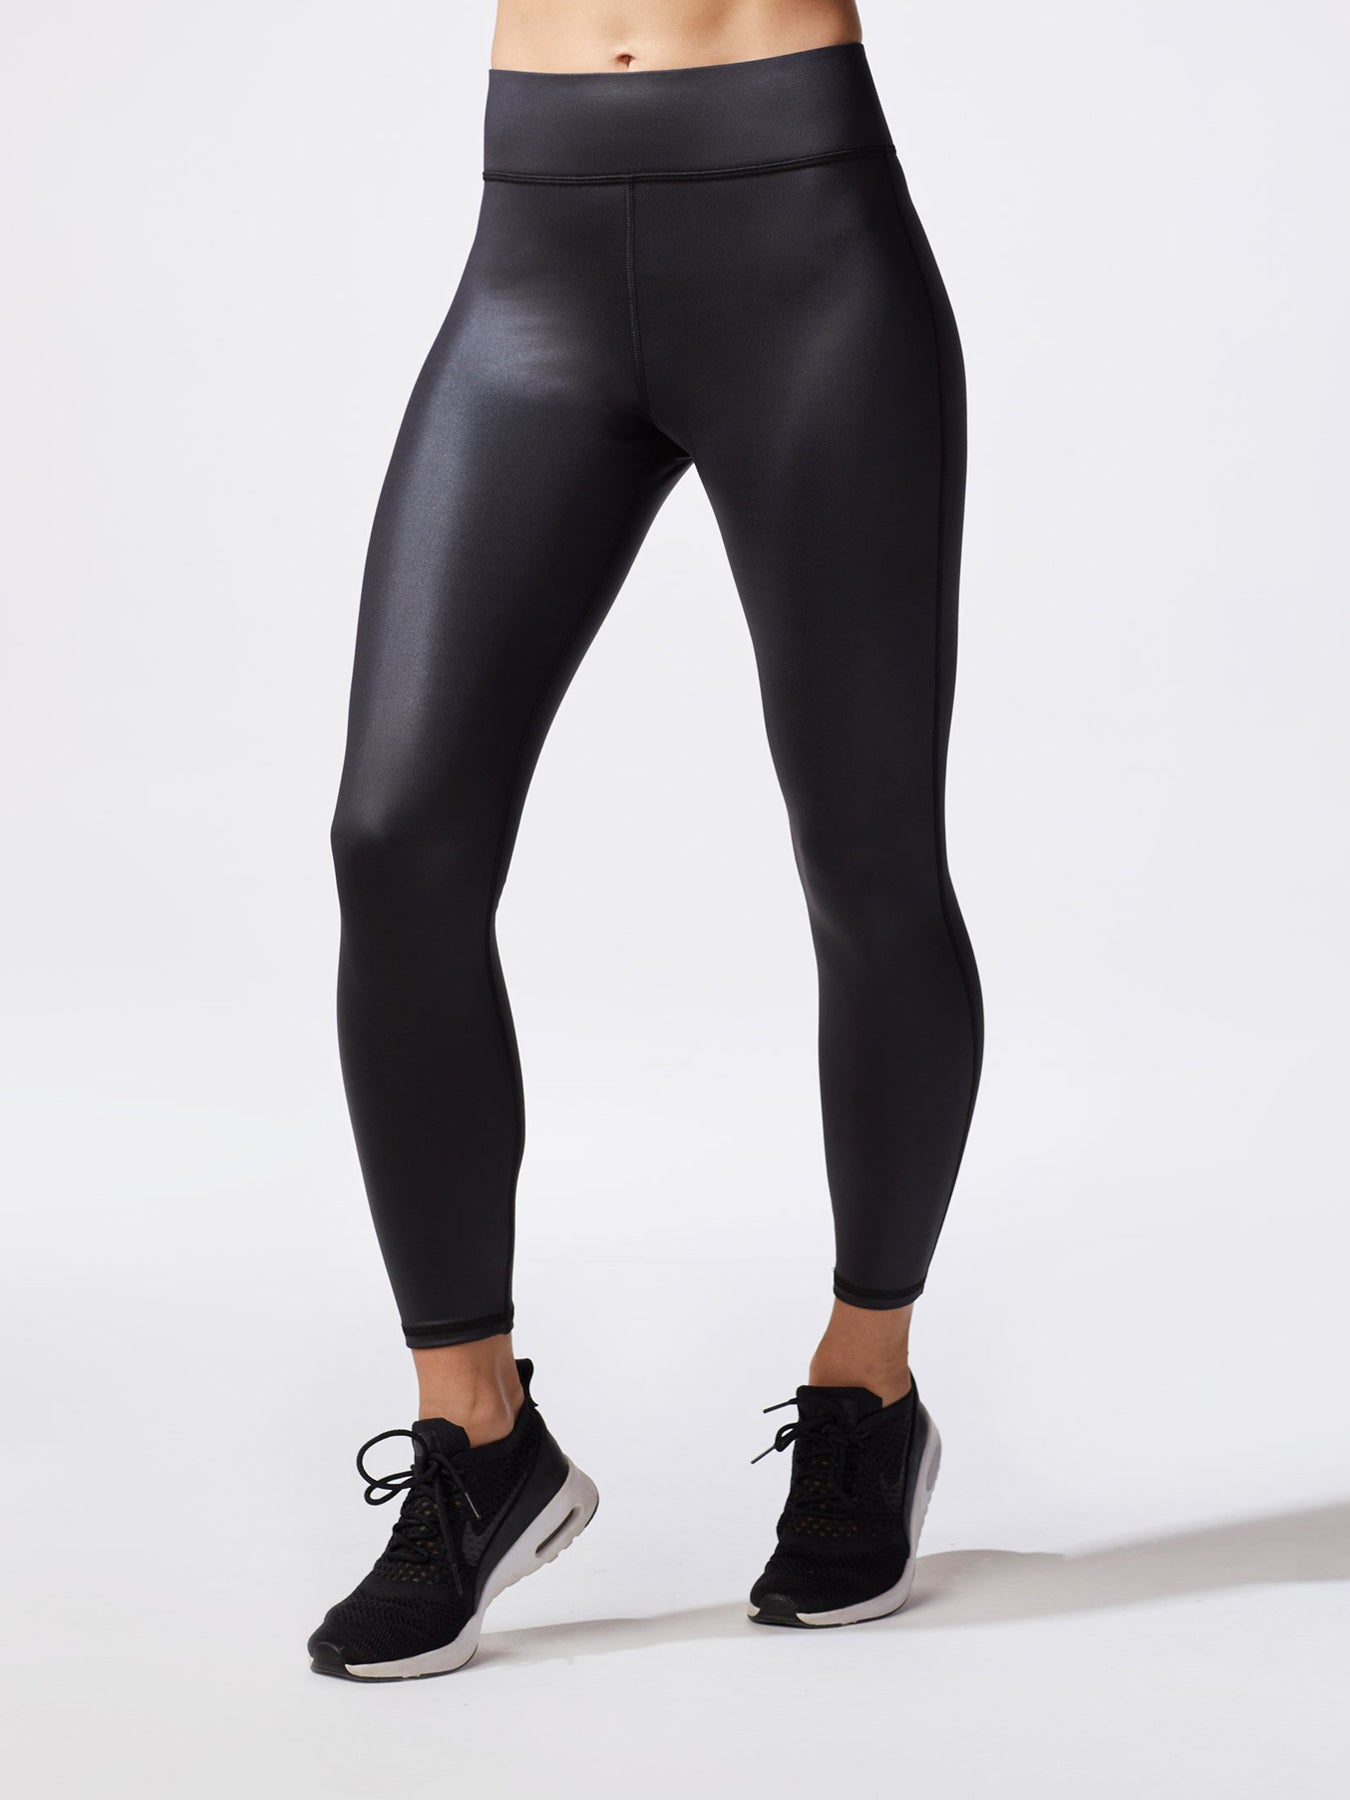 The best shiny black leggings that look luxe but still feel extra